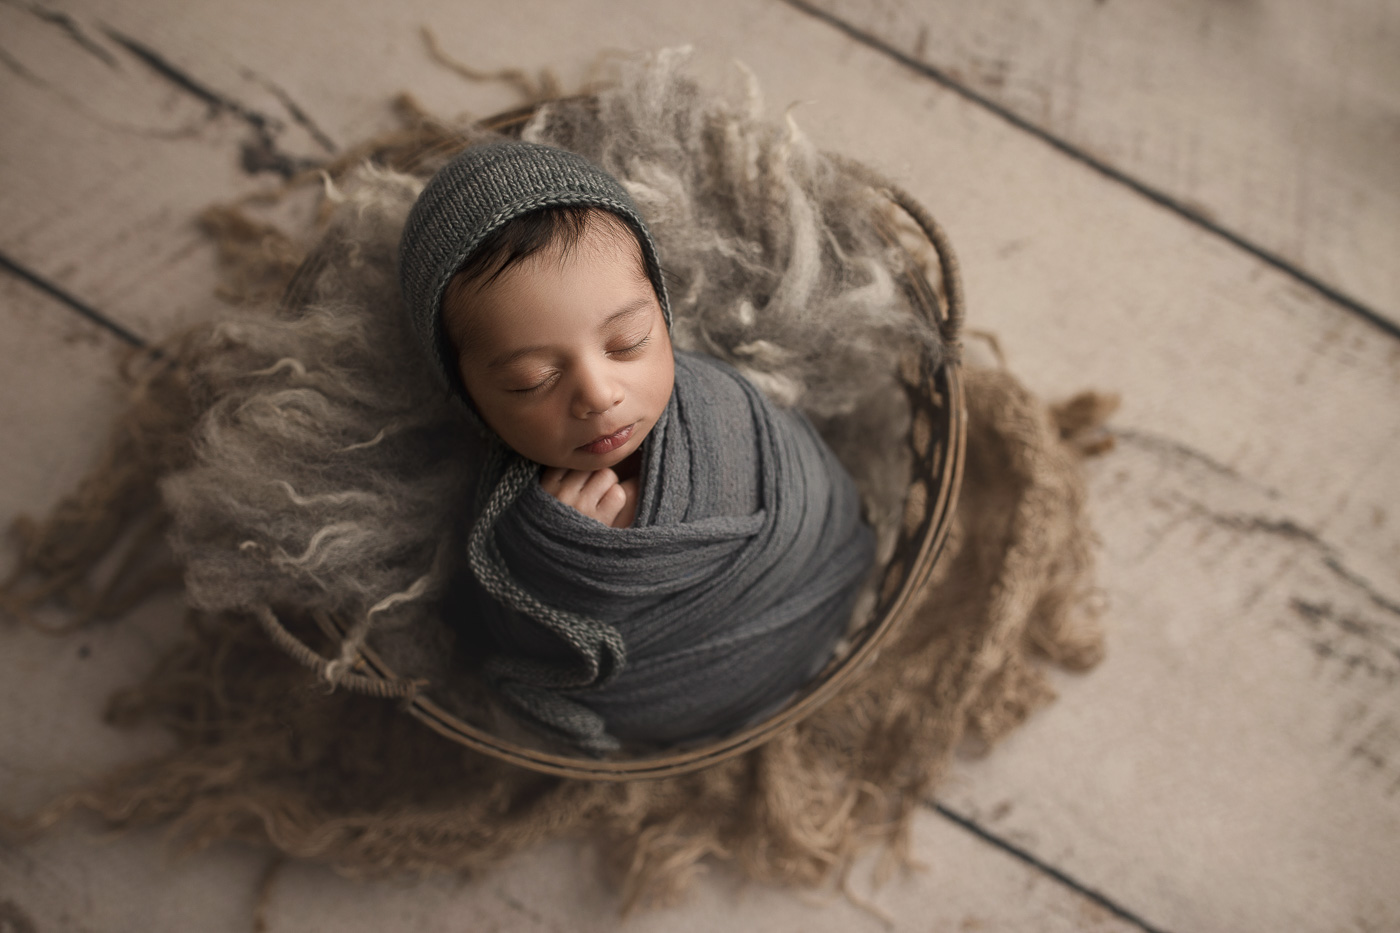 Posed perfectly at his newborn photo shoot in Indiana.